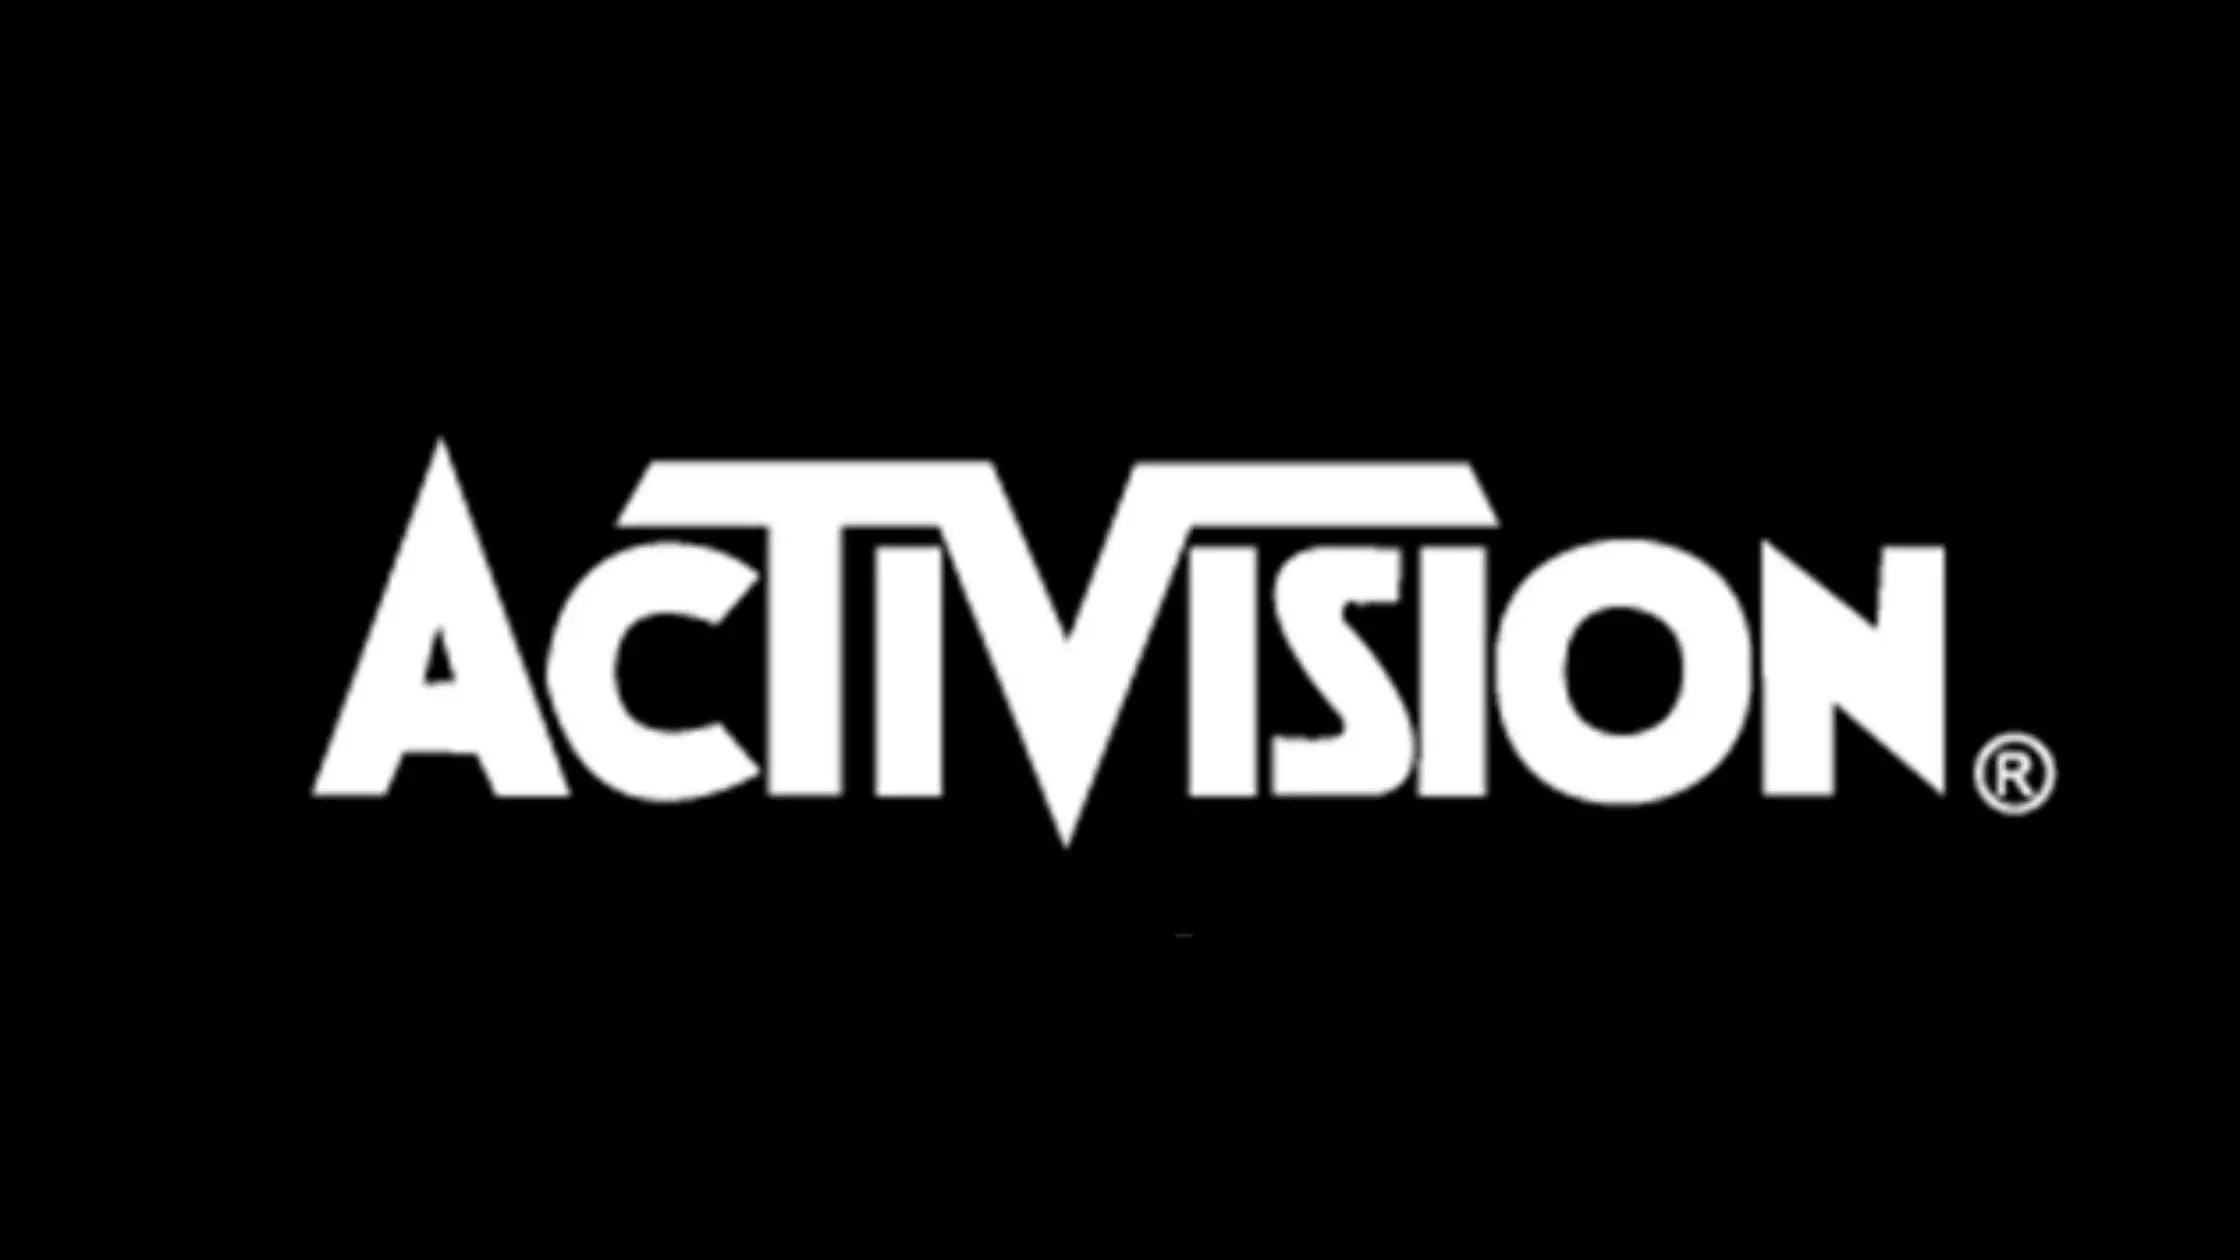 activision-accounts-hacked-over-500k-accounts-has-been-hacked